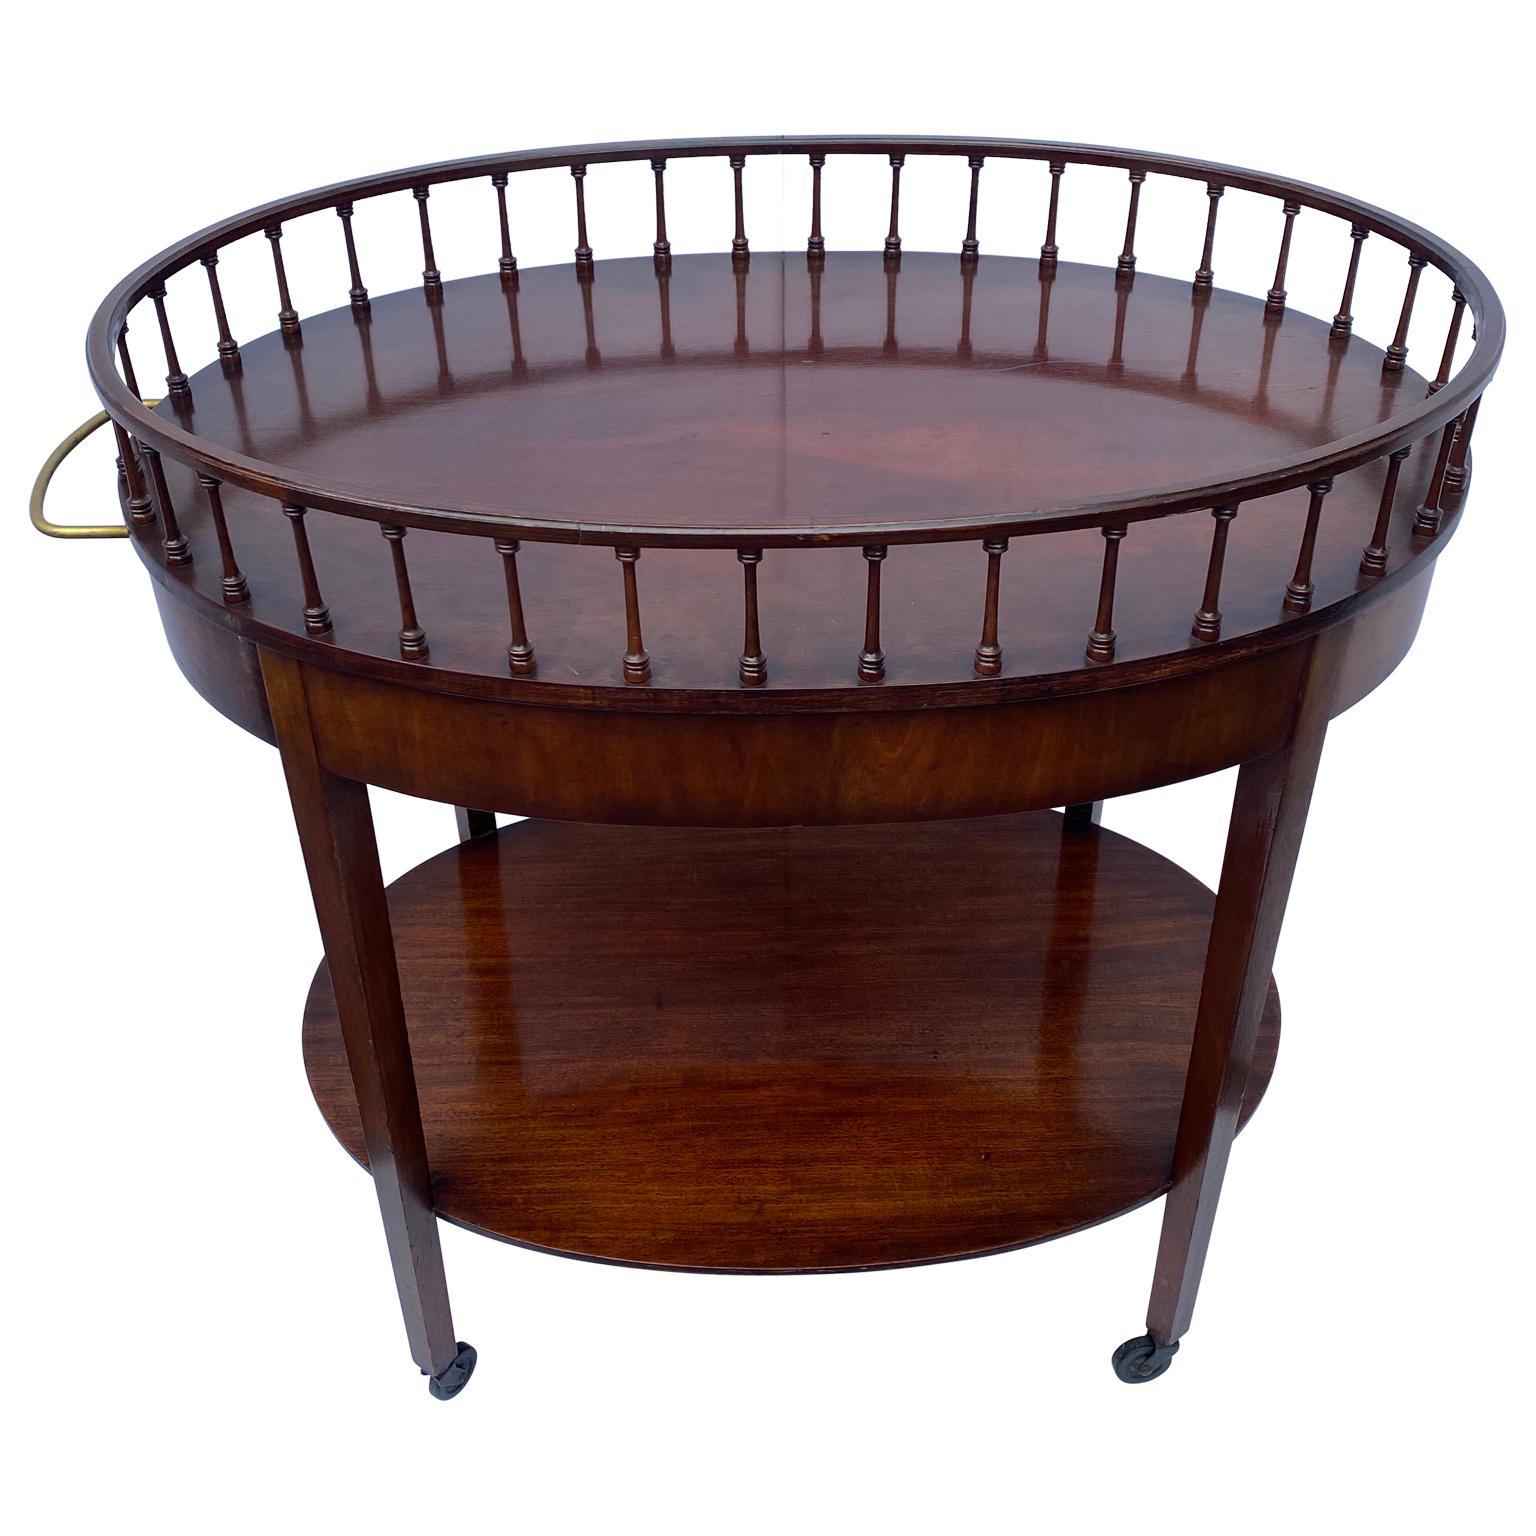 American two-tier oval tea on wheels, brass hardware and one drawer.